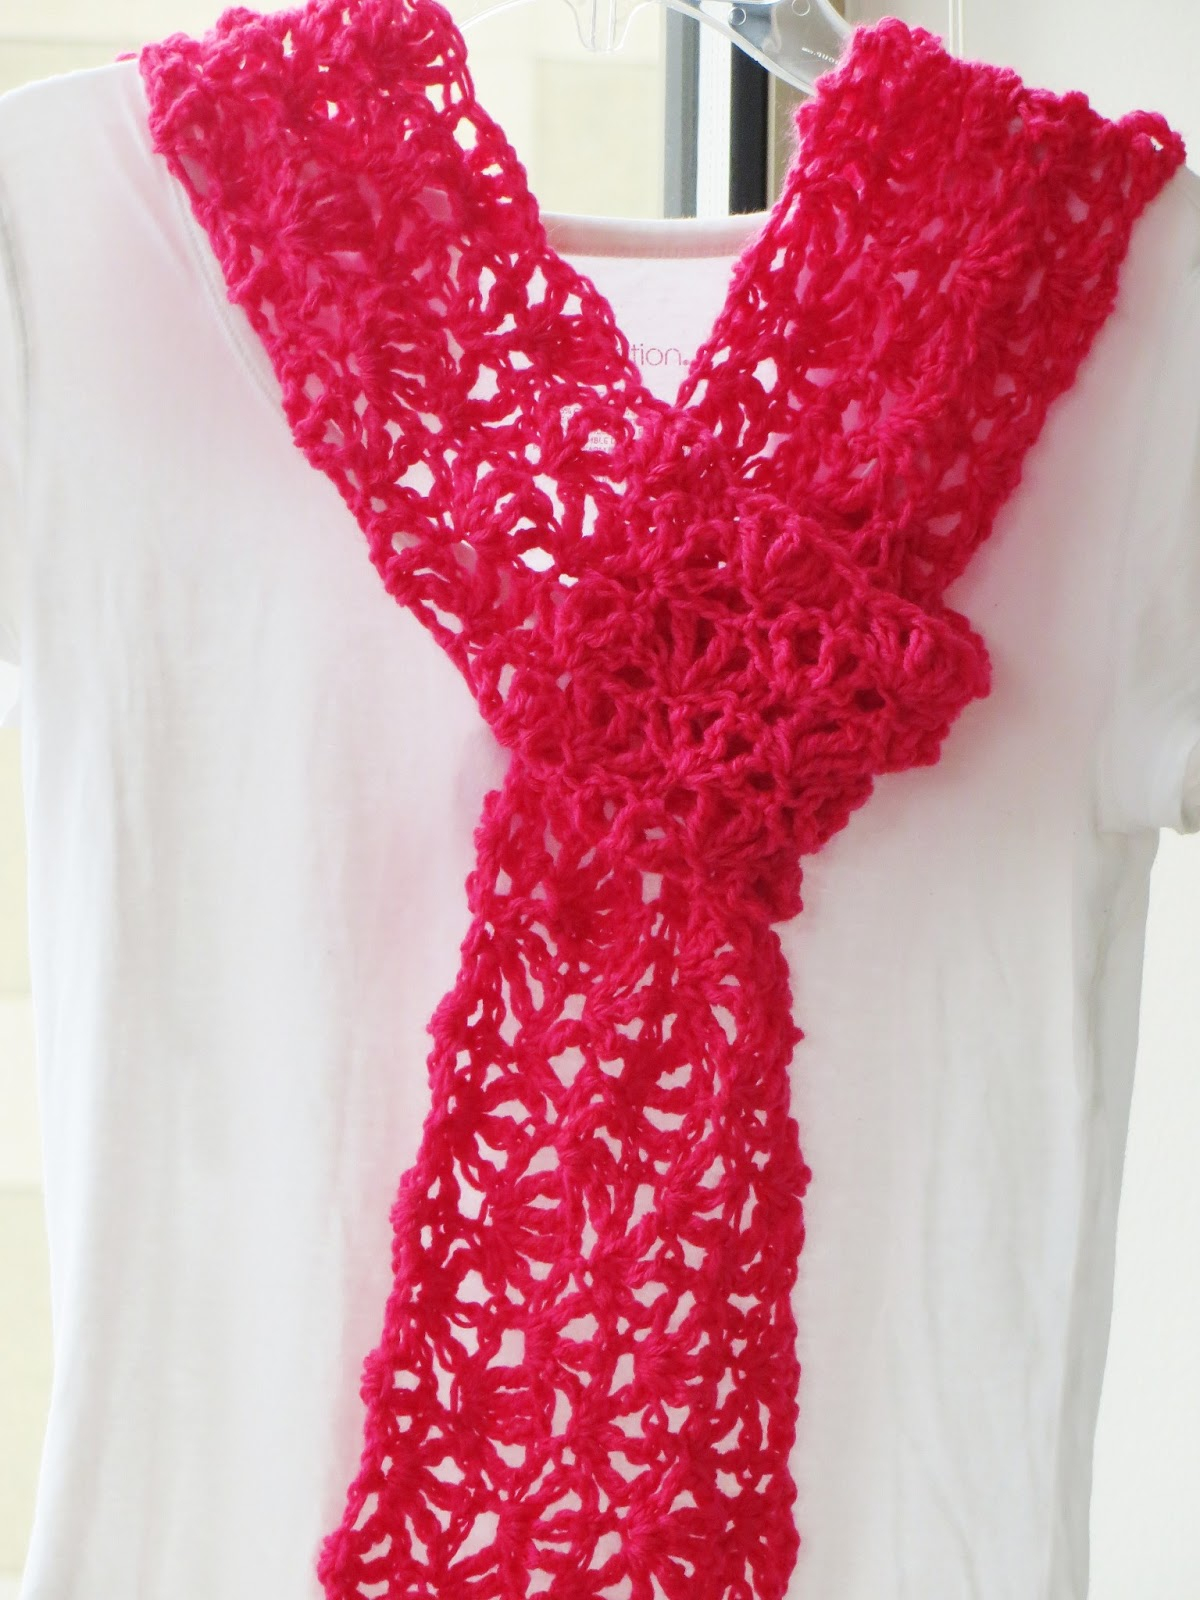 Summer Scarf Knitting Patterns Alana Lacy Scarf For Summer Free Crochet Pattern For Mothers Day